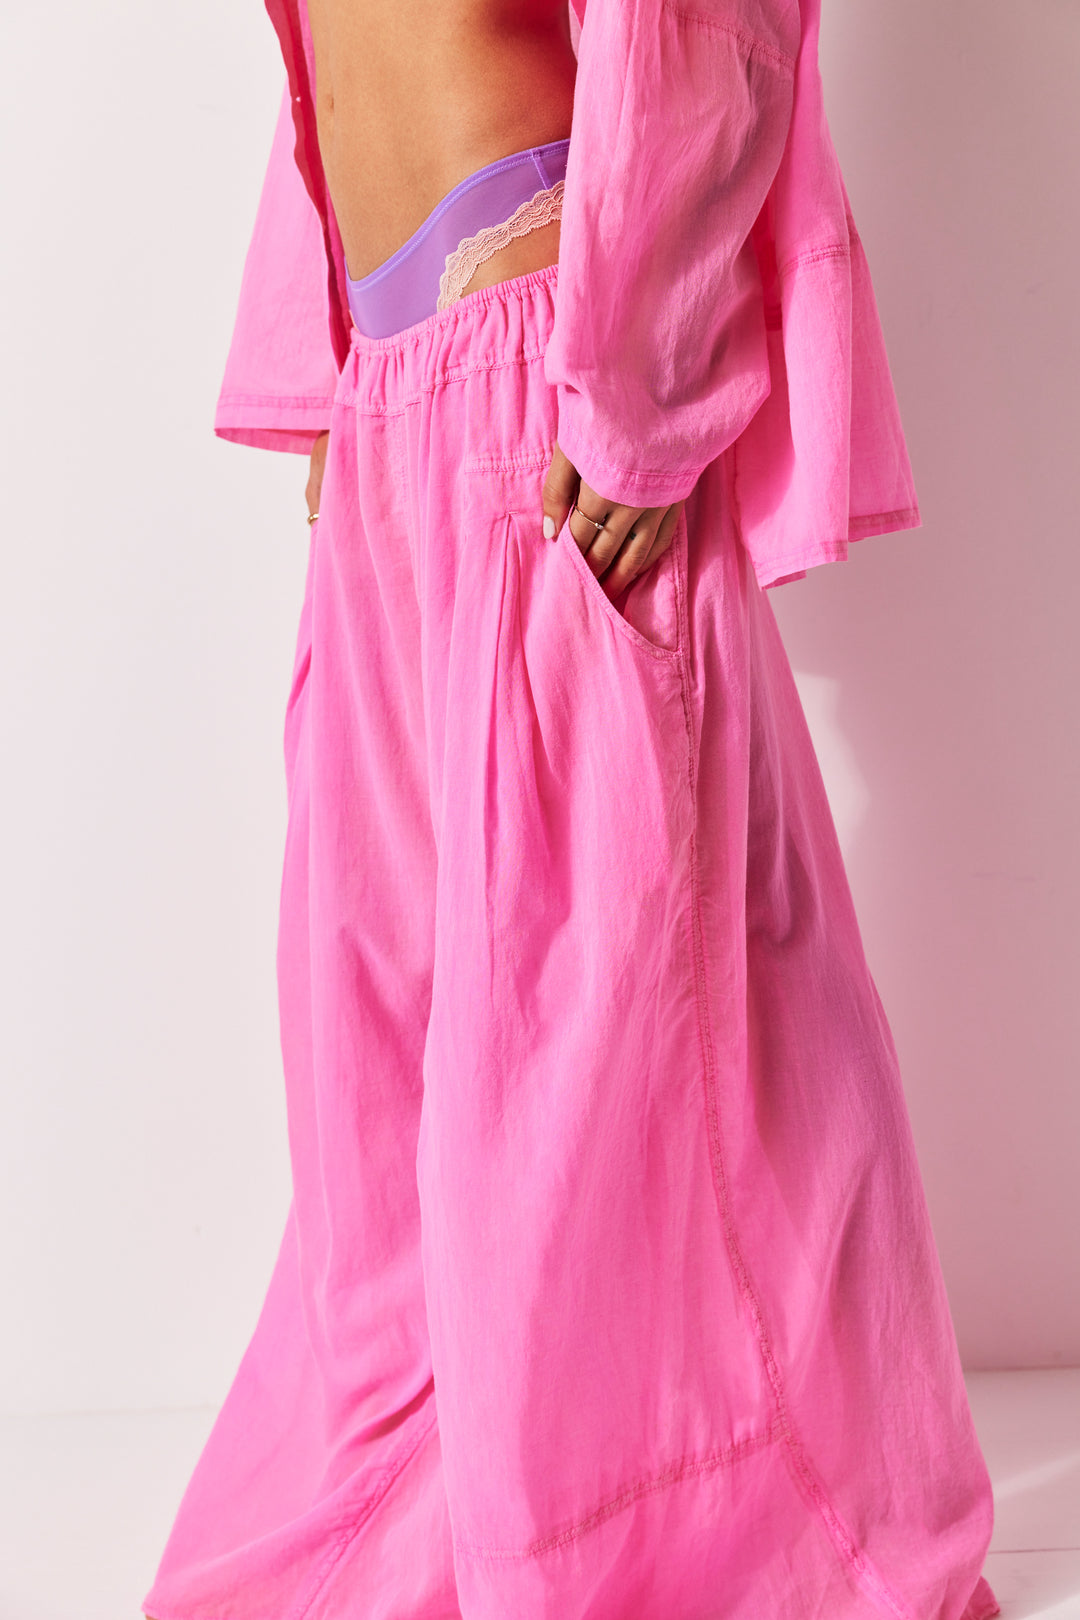 HEAT OF THE NIGHT LOUNGE-NEON PINK - Kingfisher Road - Online Boutique